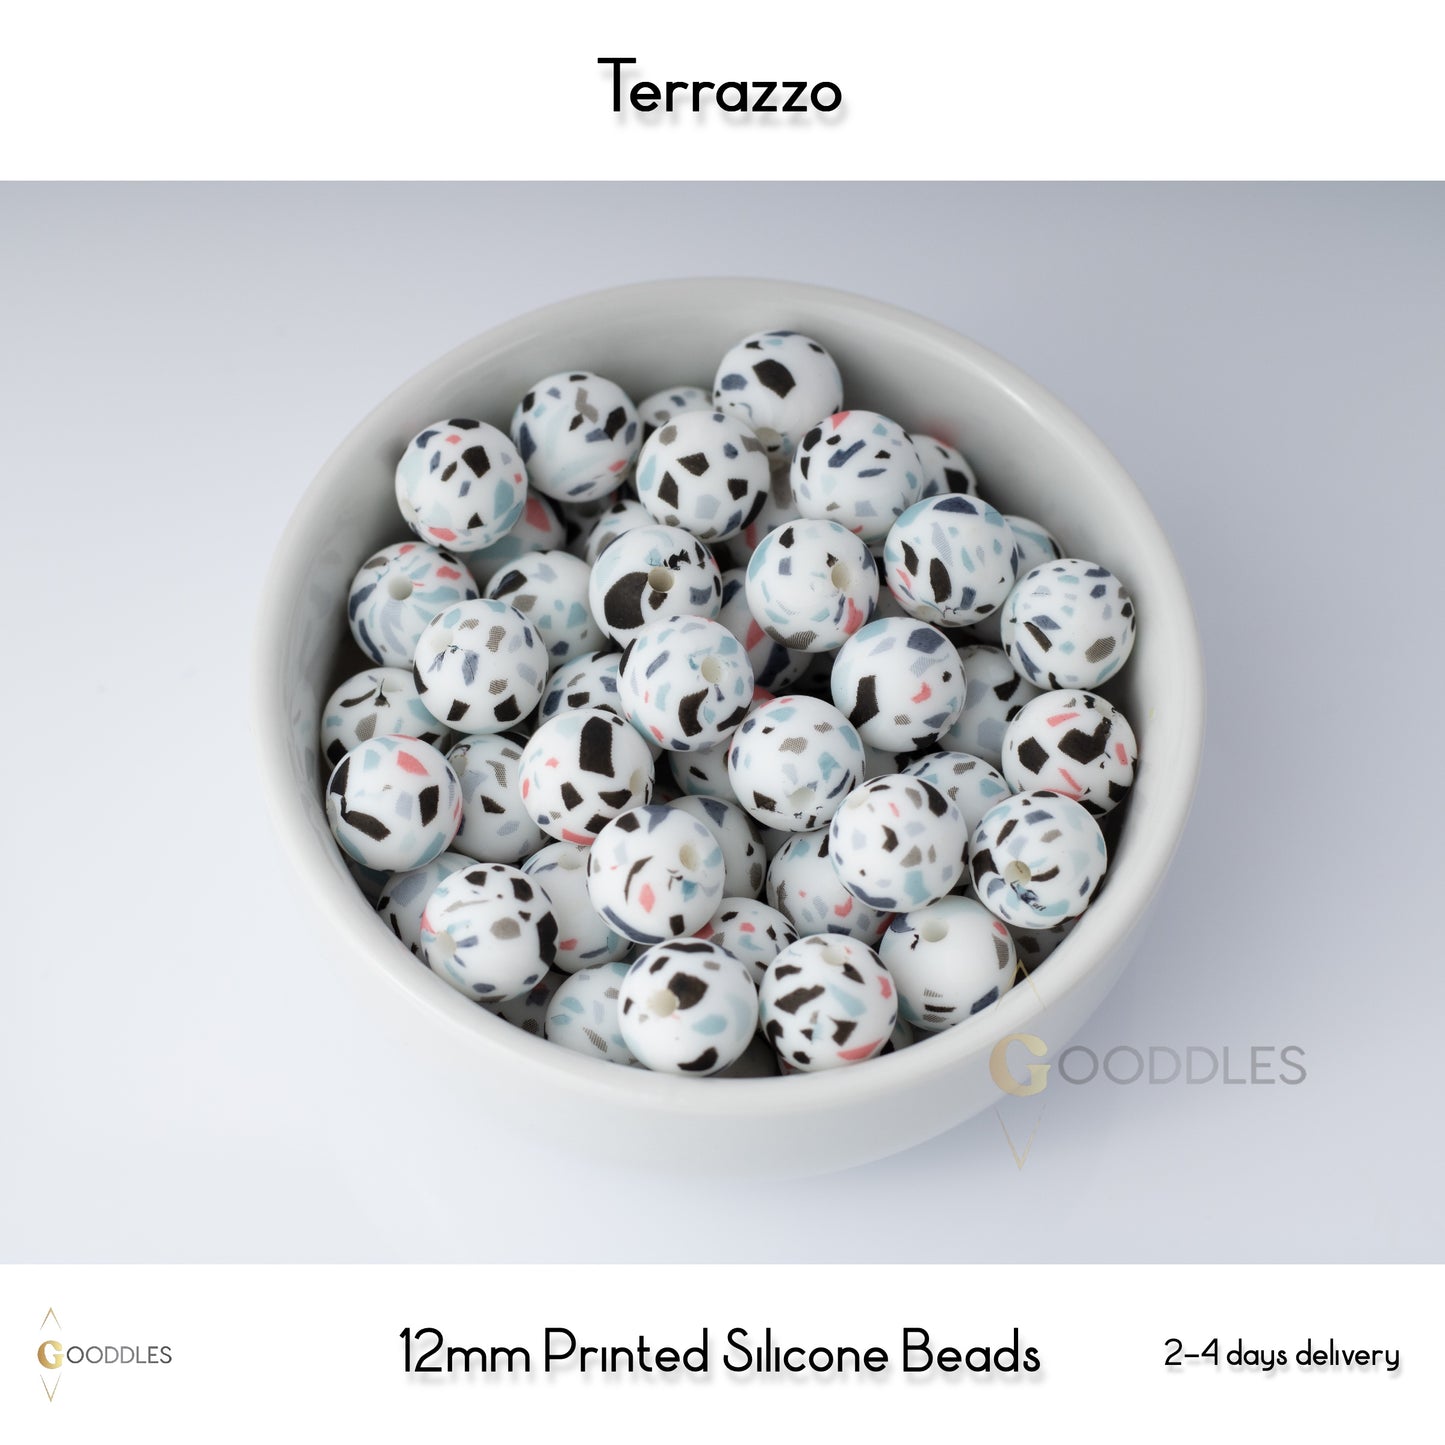 5pcs, Terrazzo Silicone Beads Printed Round Silicone Beads